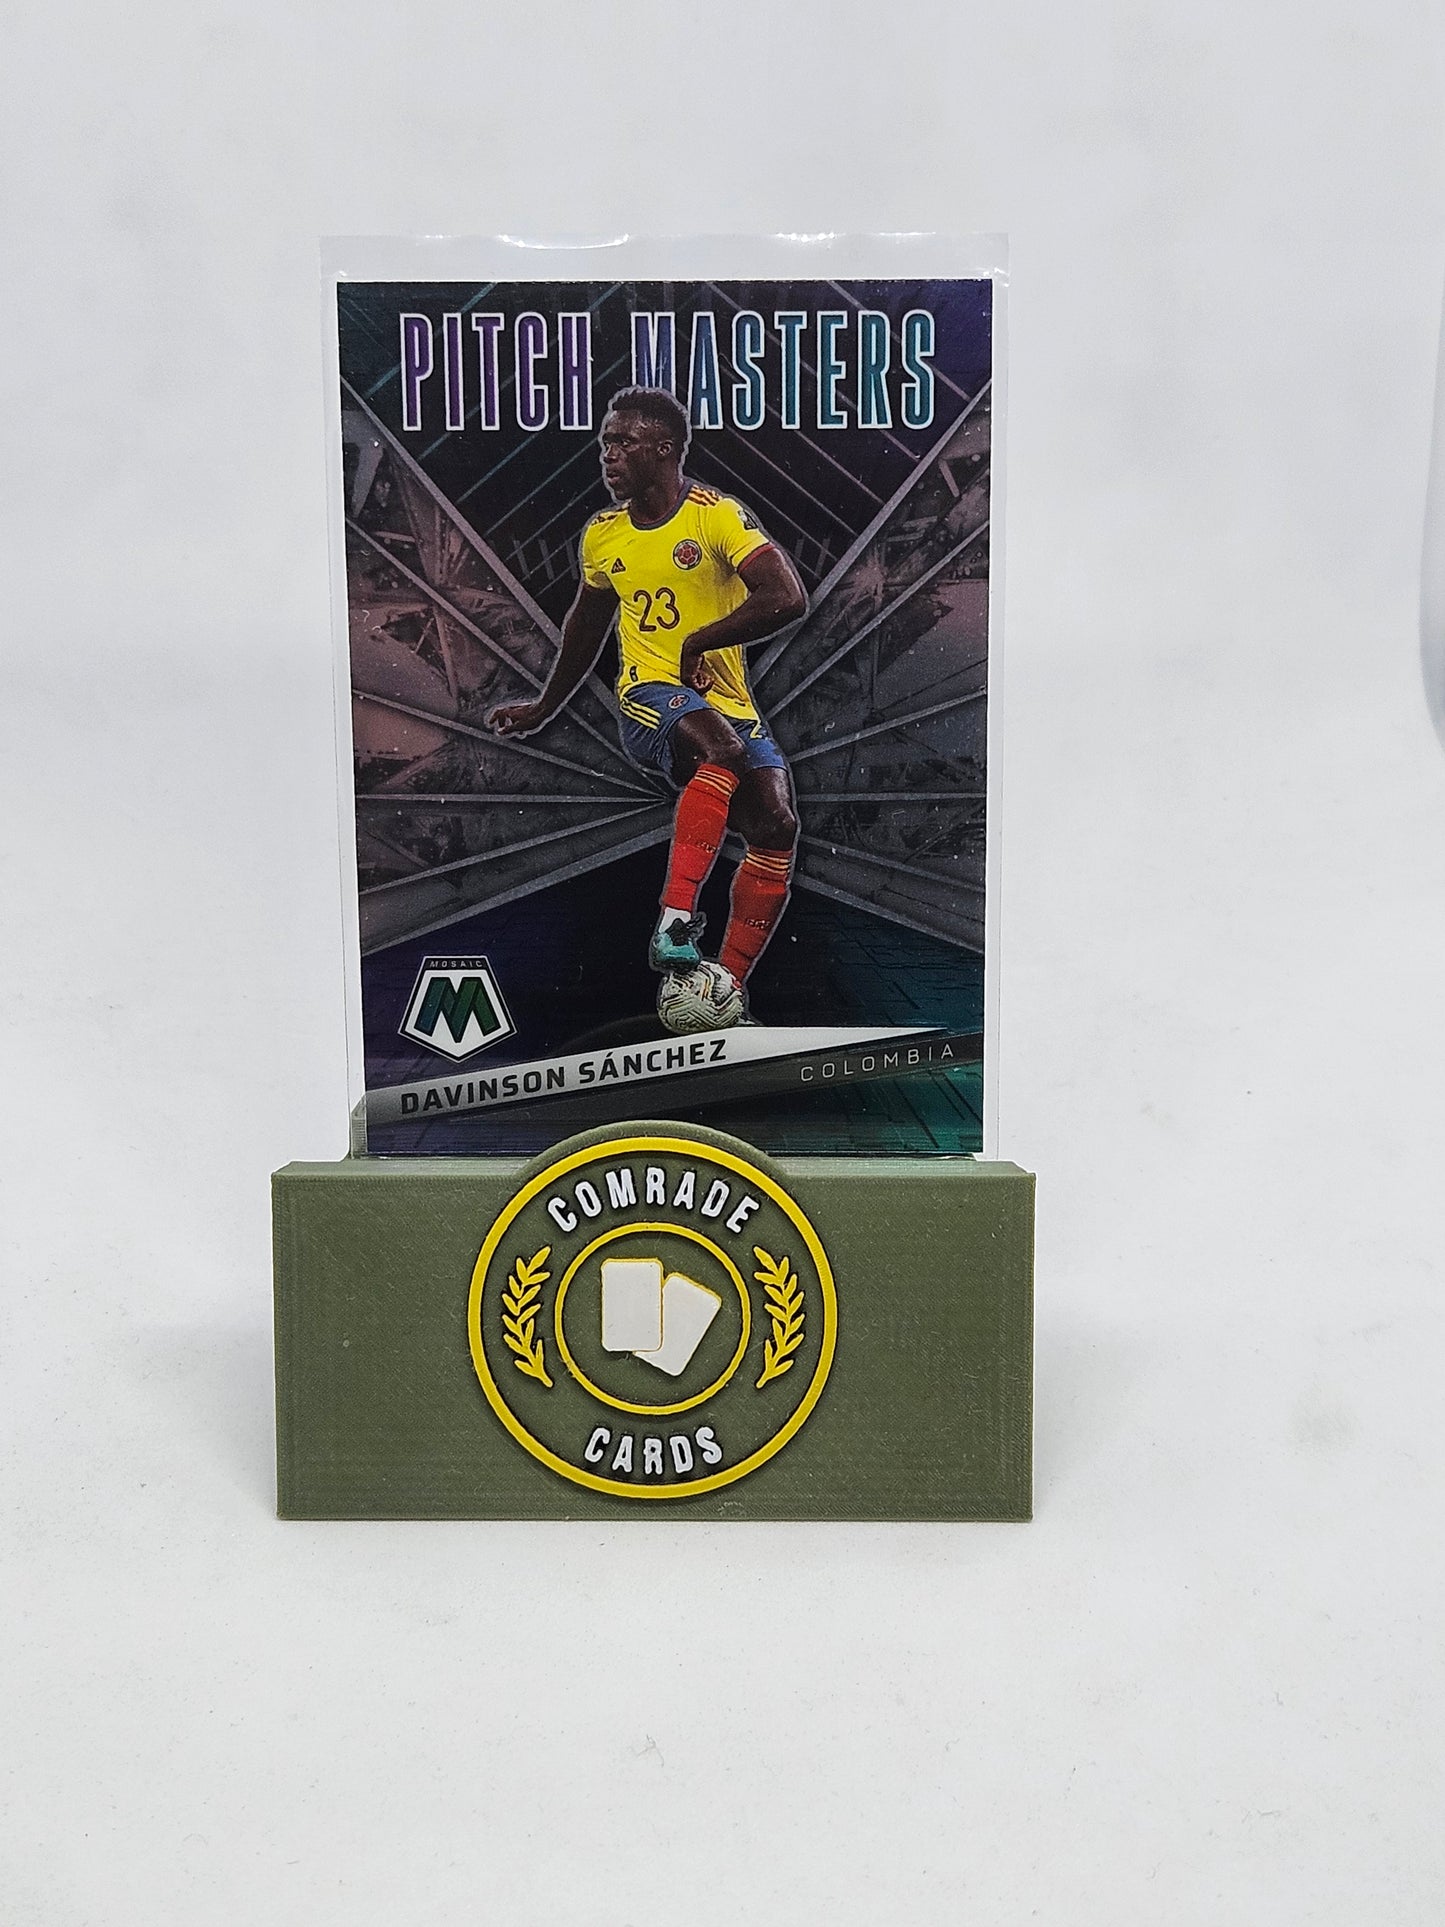 Davinson Sanchez (Colombia) Pitch Masters Insert Mosaic Road To World Cup Qatar